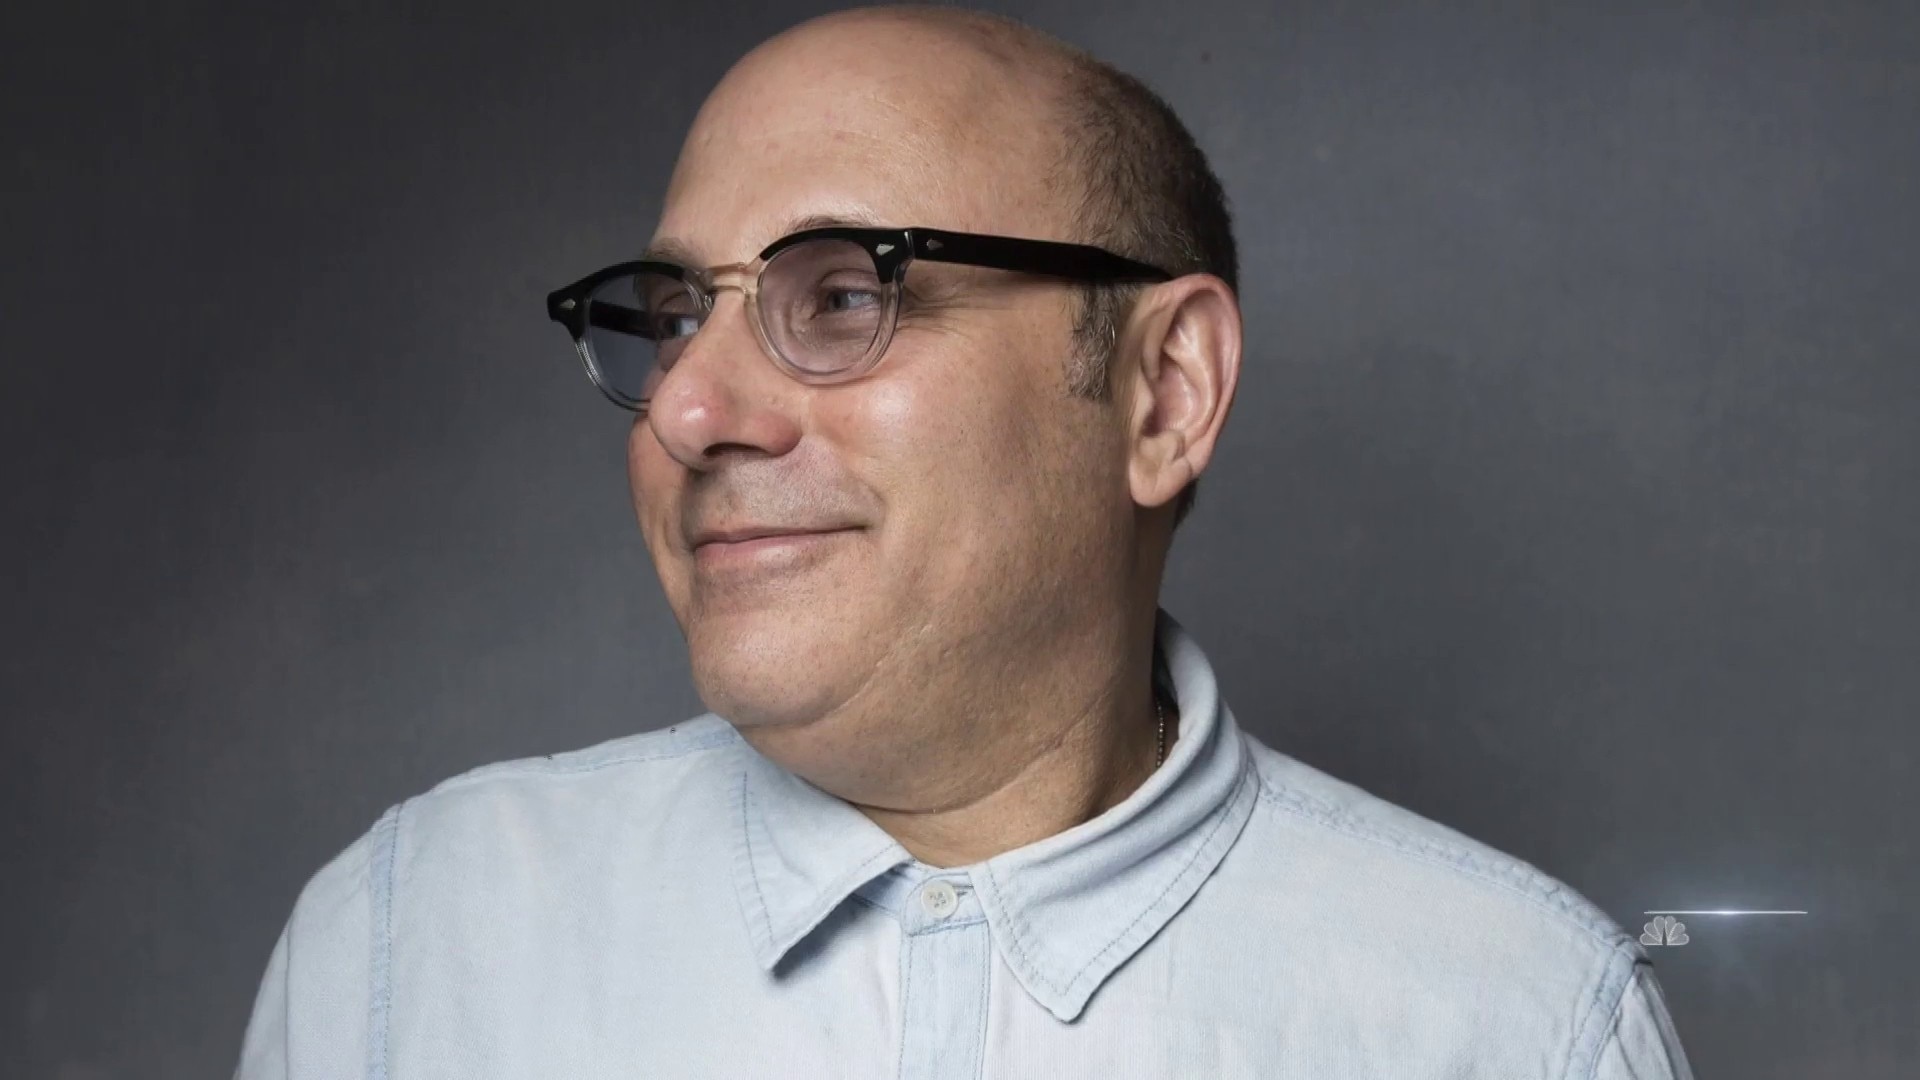 Watch Nbc Nightly News With Lester Holt Excerpt Remembering Actor Willie Garson Of ‘sex And The